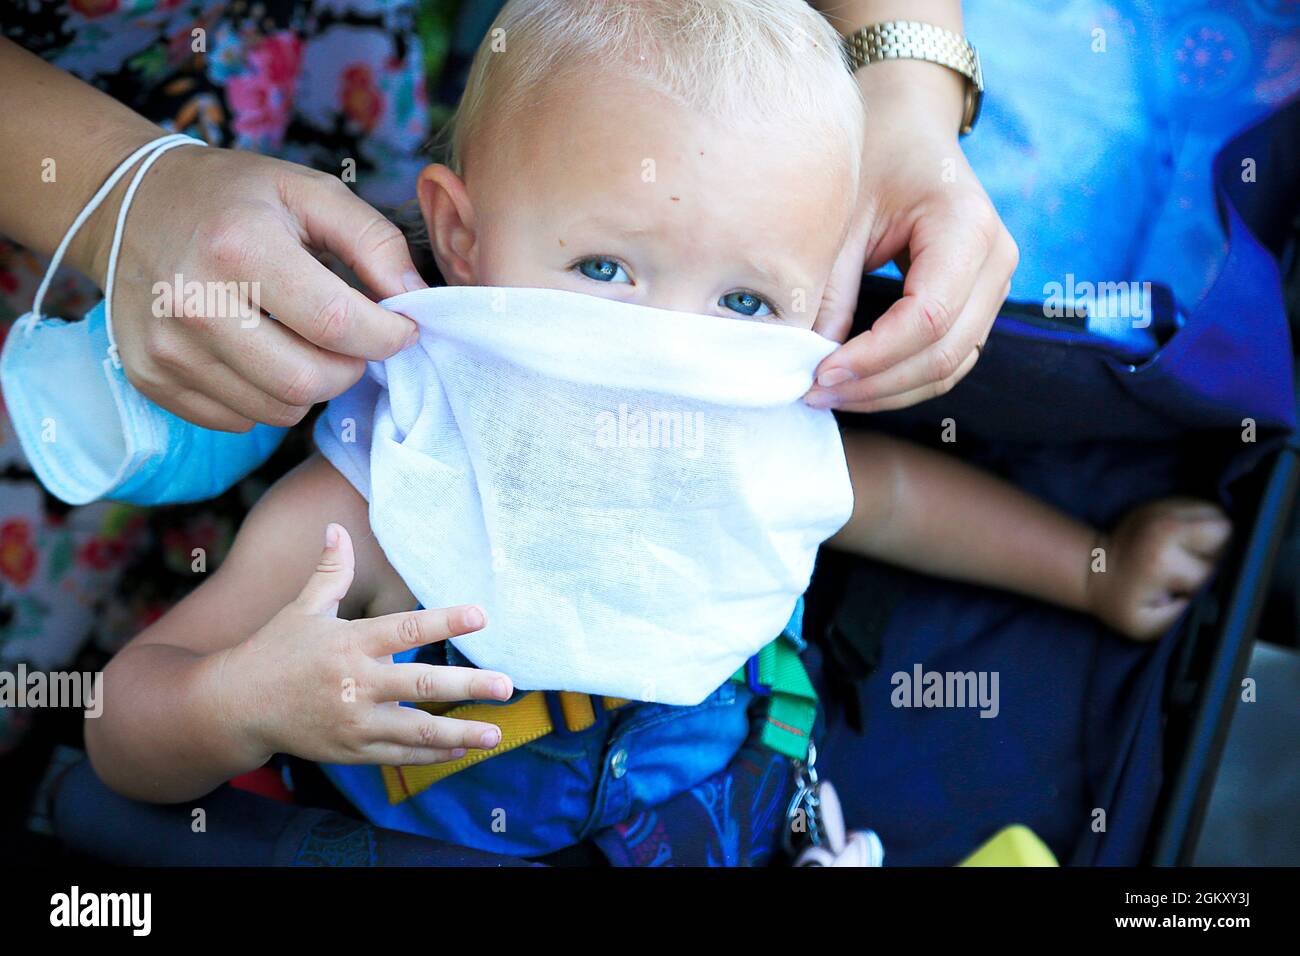 Mother puts white scarf as a protective musk on blue eye blond baby. kids portrait. Female caucasian hand with blue medical mask on wrist. Looking Stock Photo